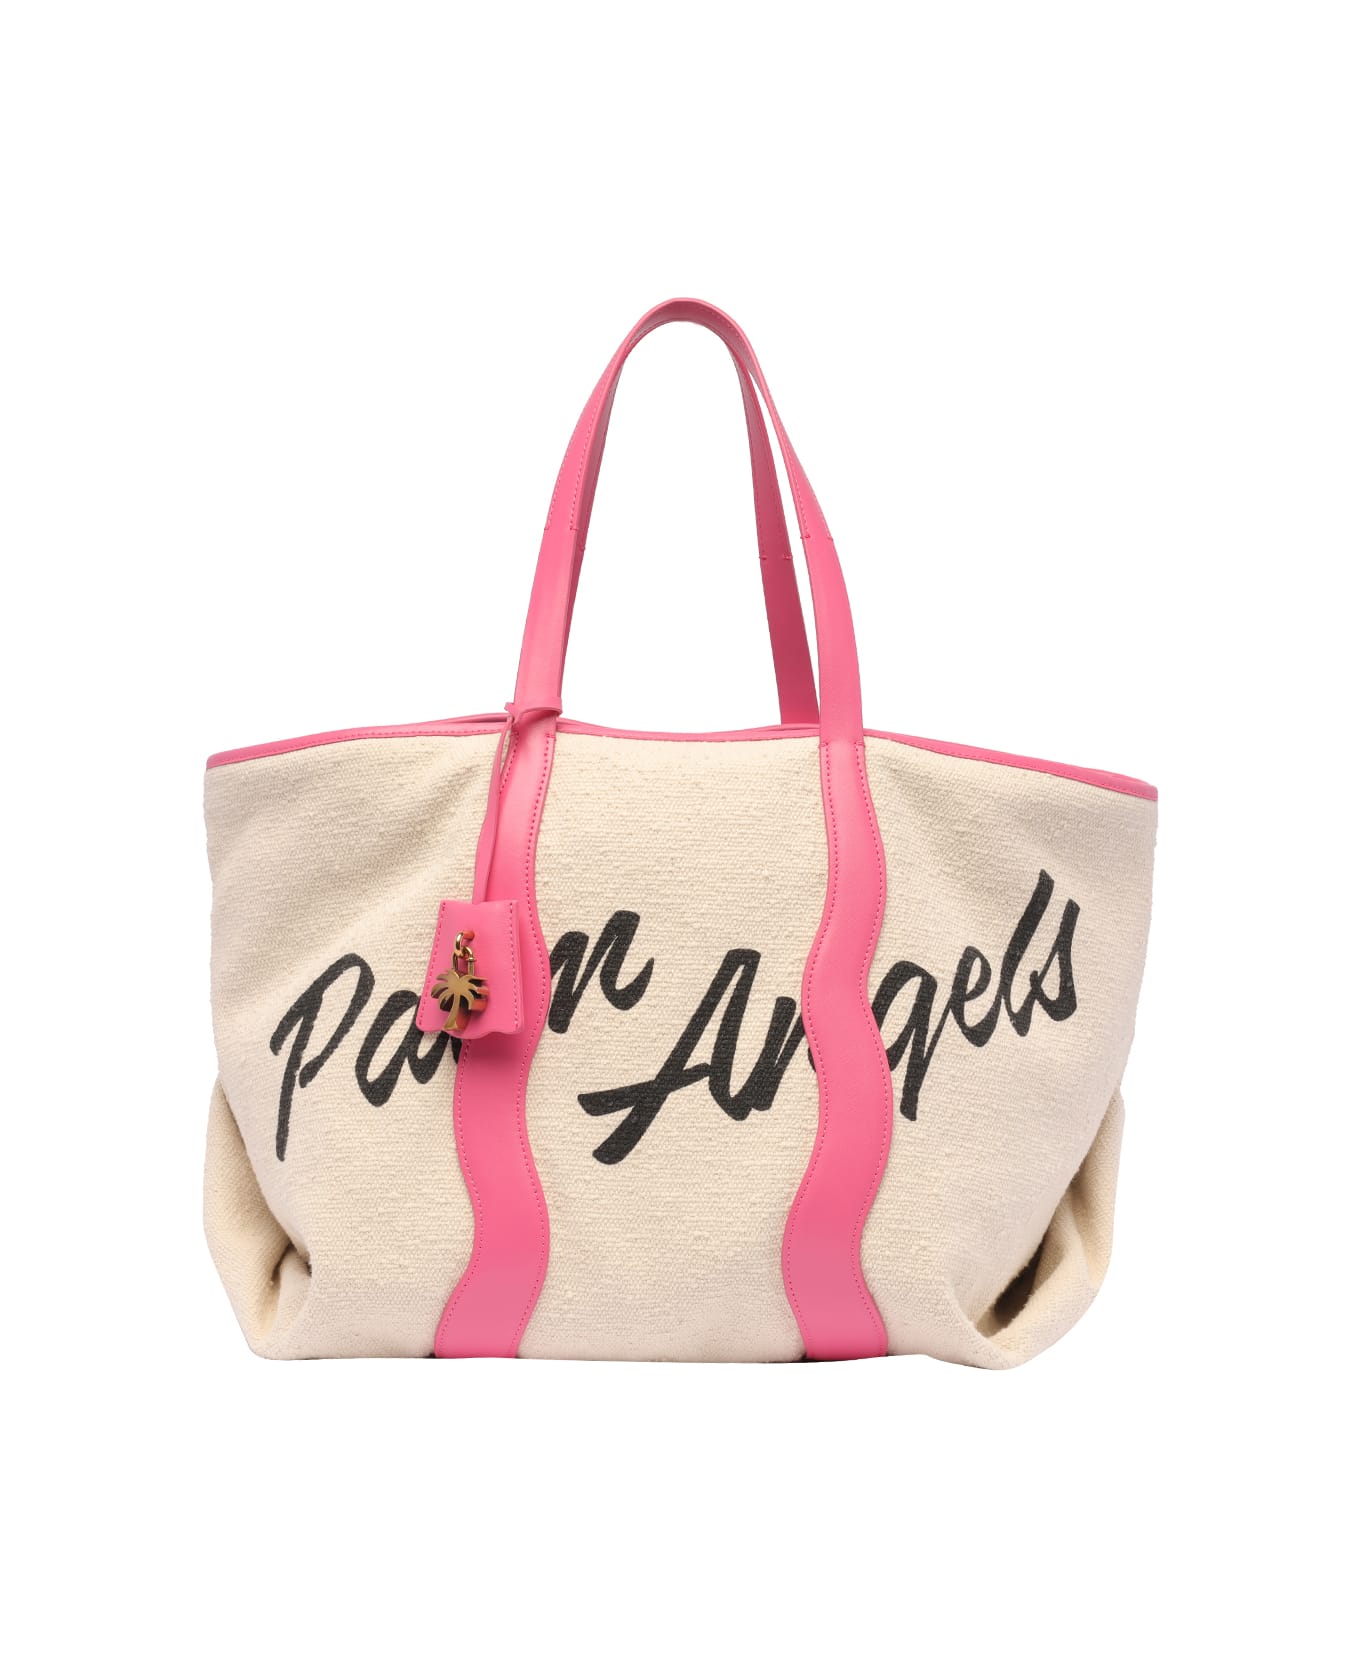 Palm Angels Tote Bag - White トートバッグ